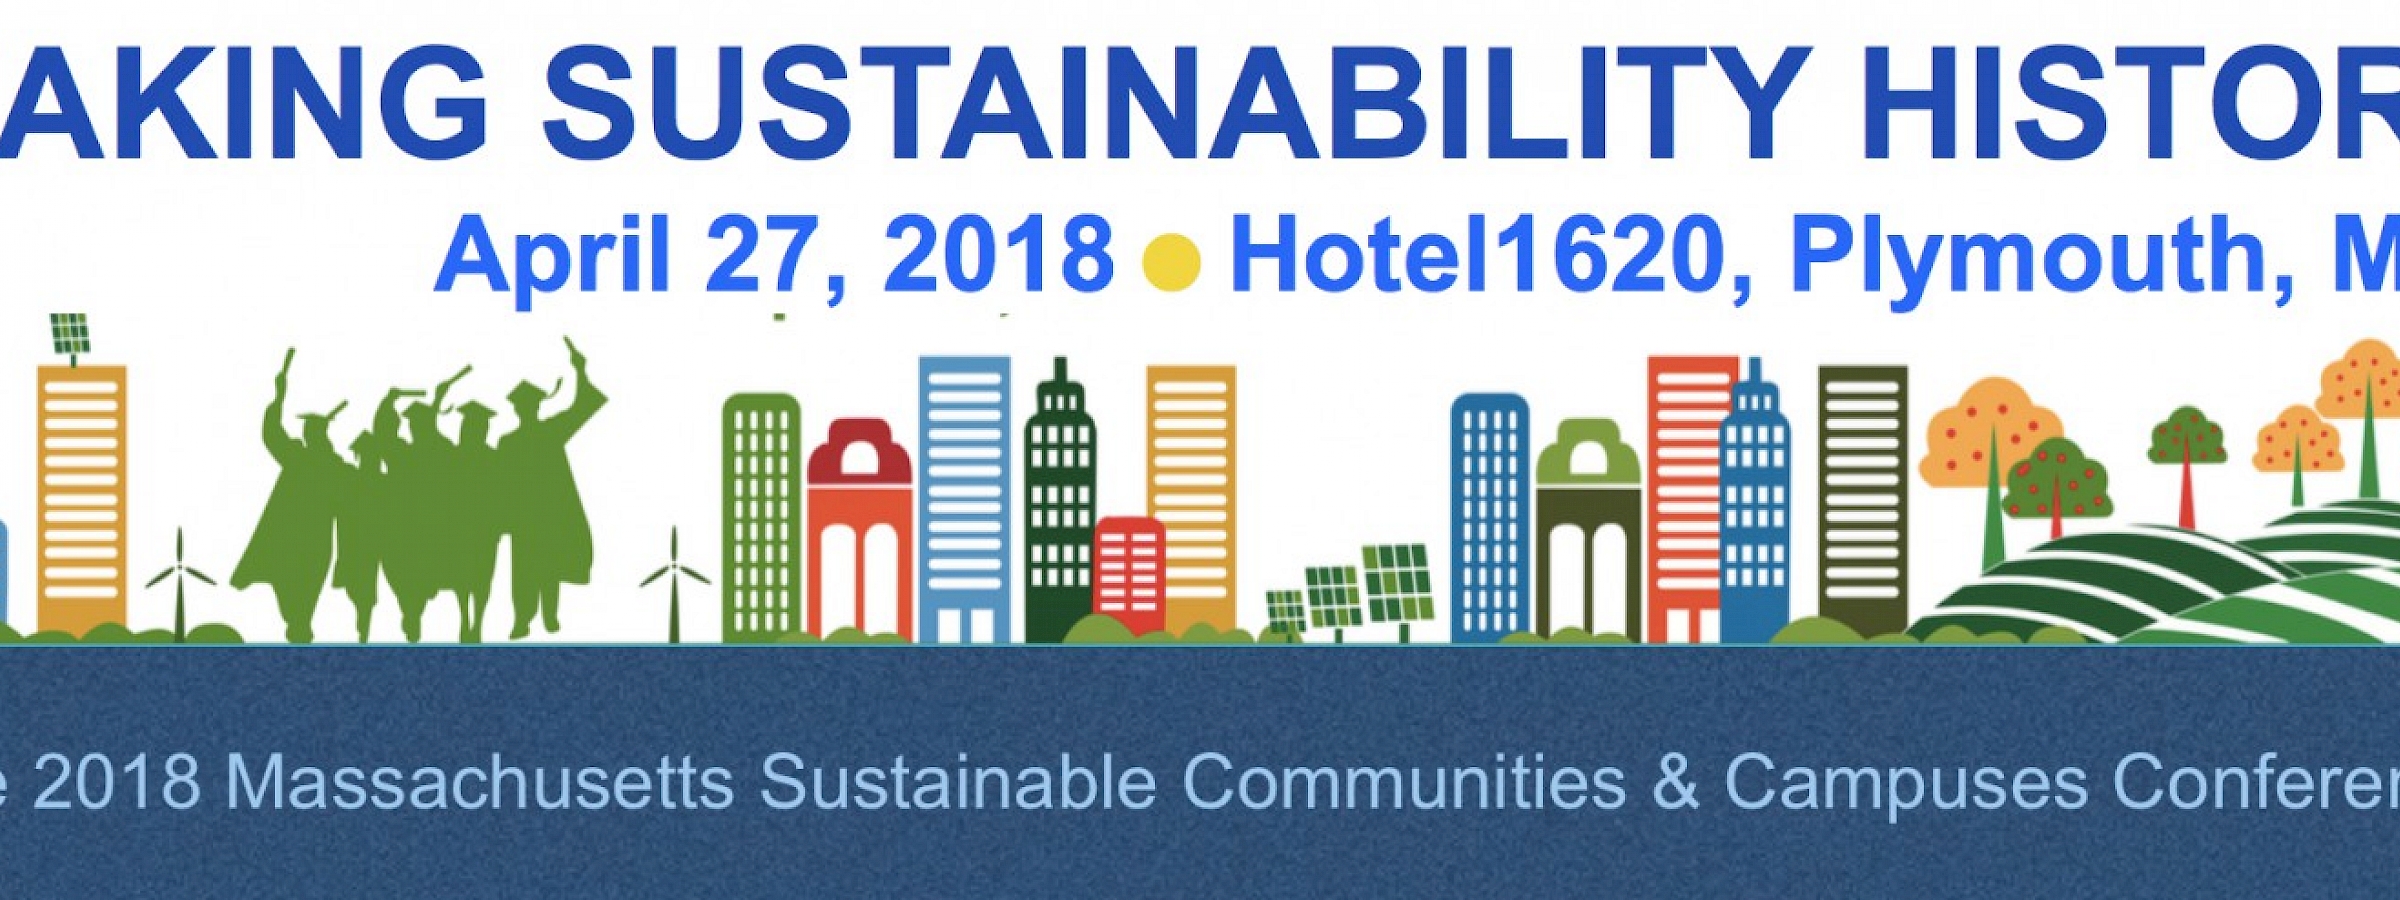 Making Sustainable History - The 2018 Massachusetts Sustainable Communities & Campuses Conference